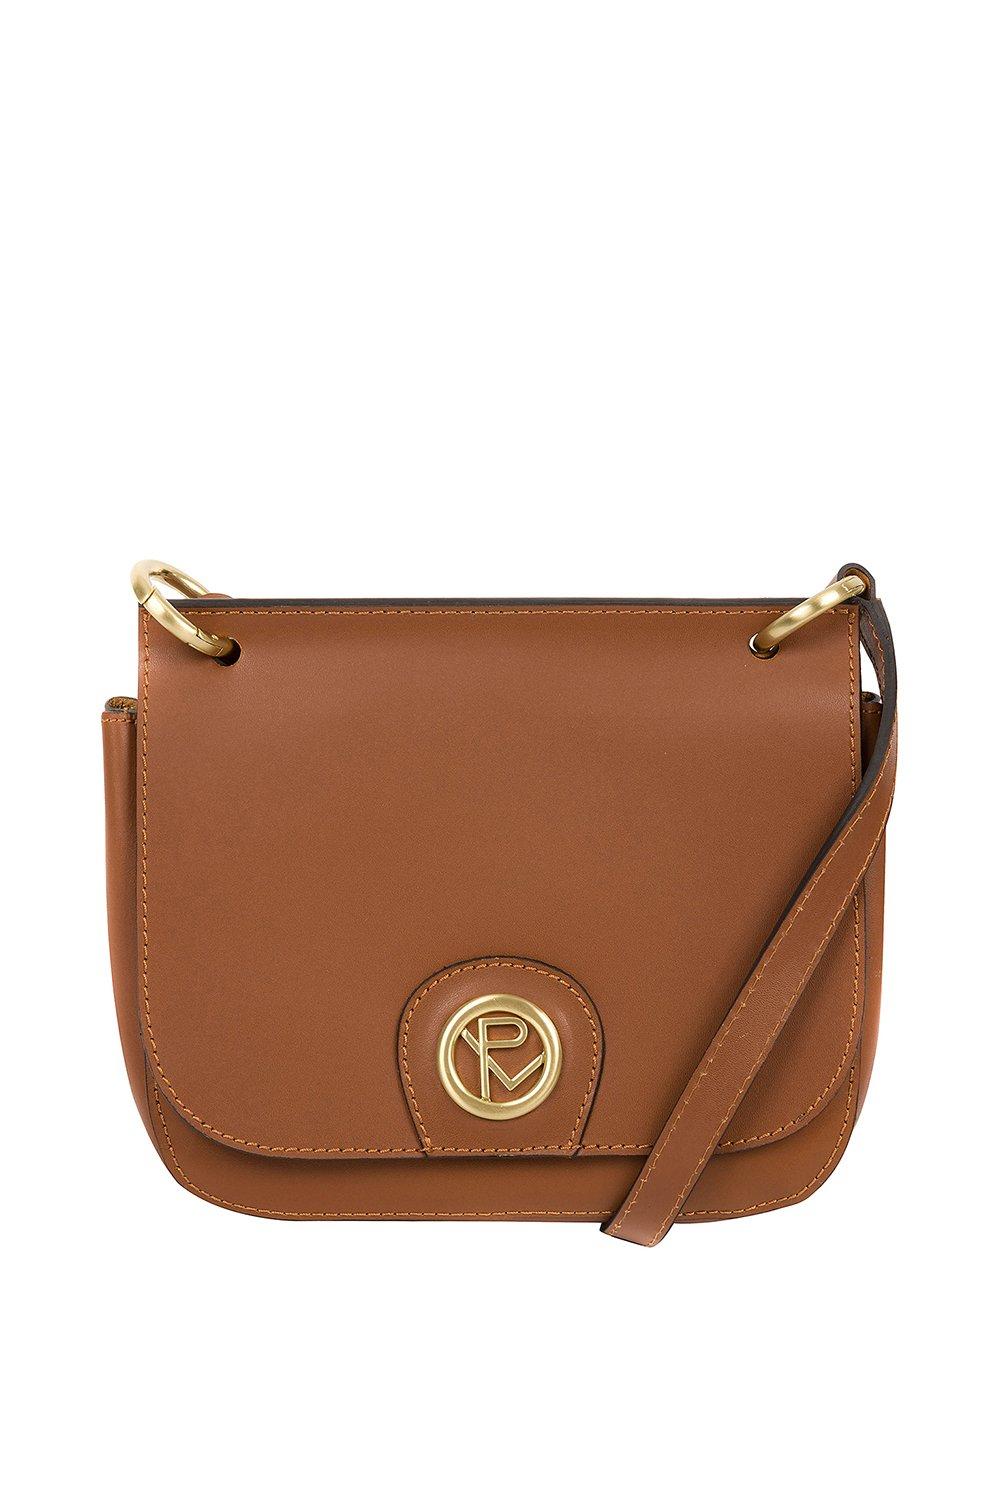 Bags & Purses | 'Ennerdale' Leather Cross Body Bag | Pure Luxuries London